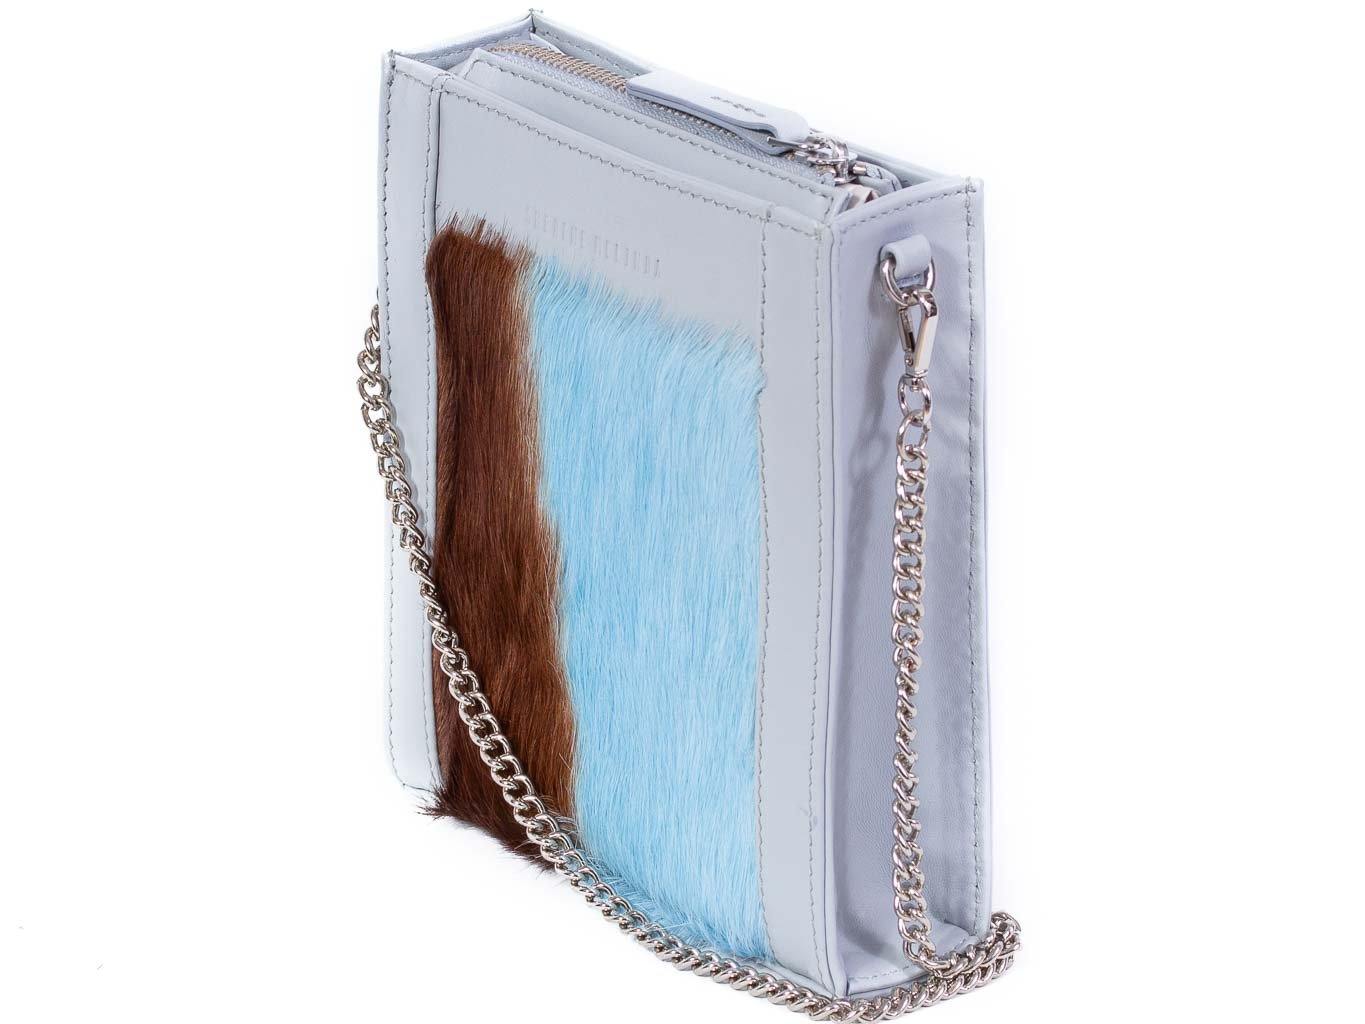 Messenger Springbok Handbag in Baby Blue with a stripe feature by Sherene Melinda front strap